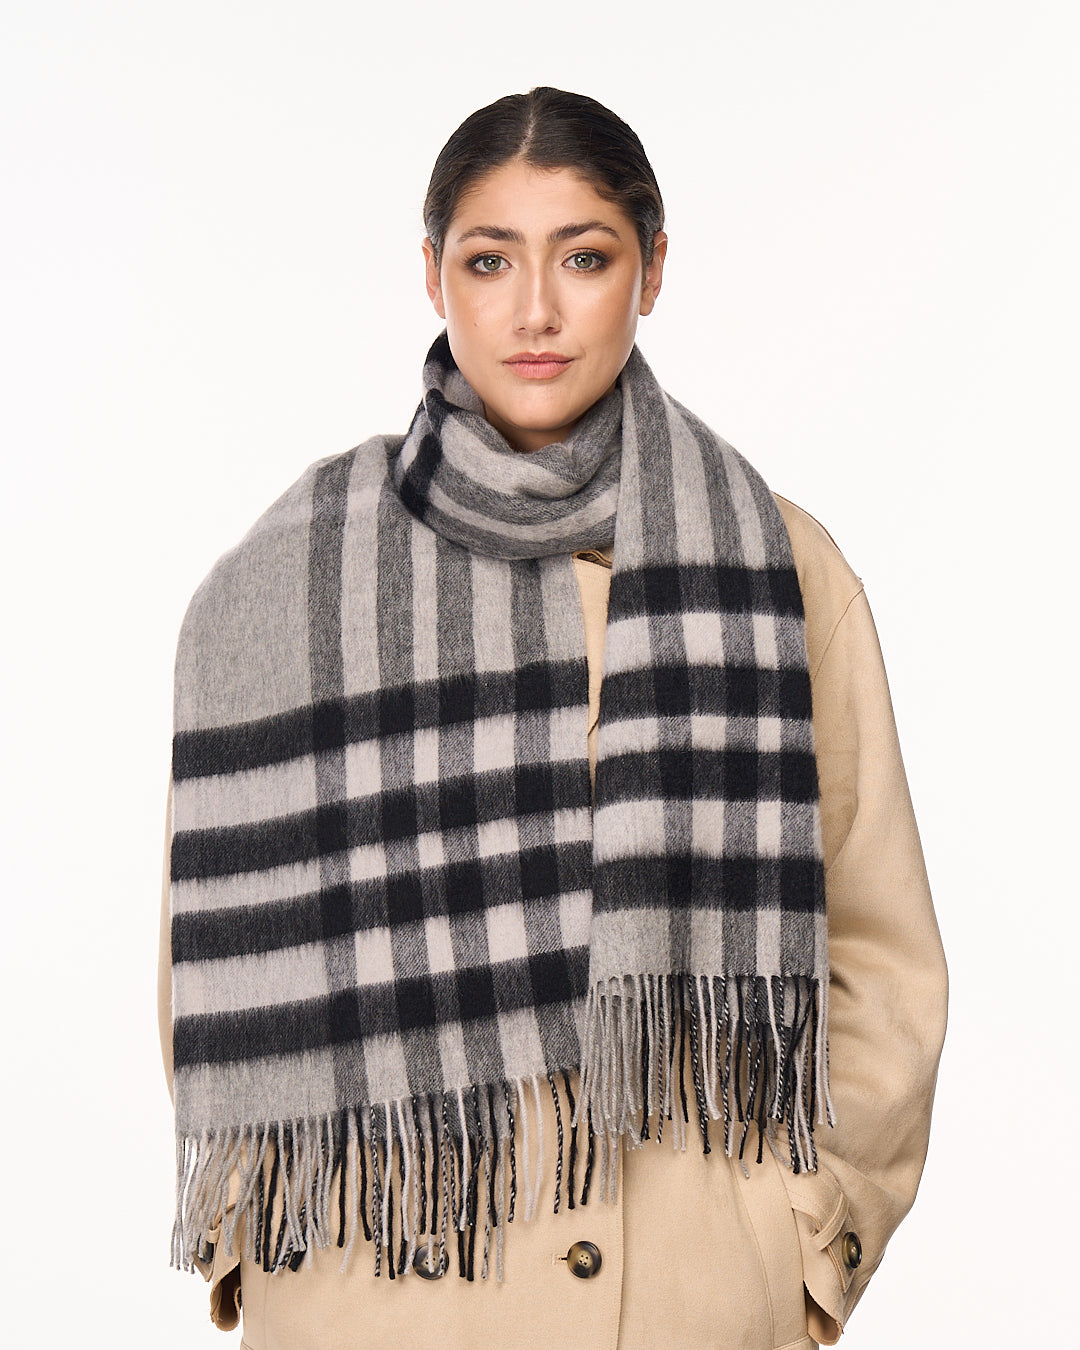 Edinburgh Cashmere Classic Wool Wraps - Why They Are Winter Must-Haves